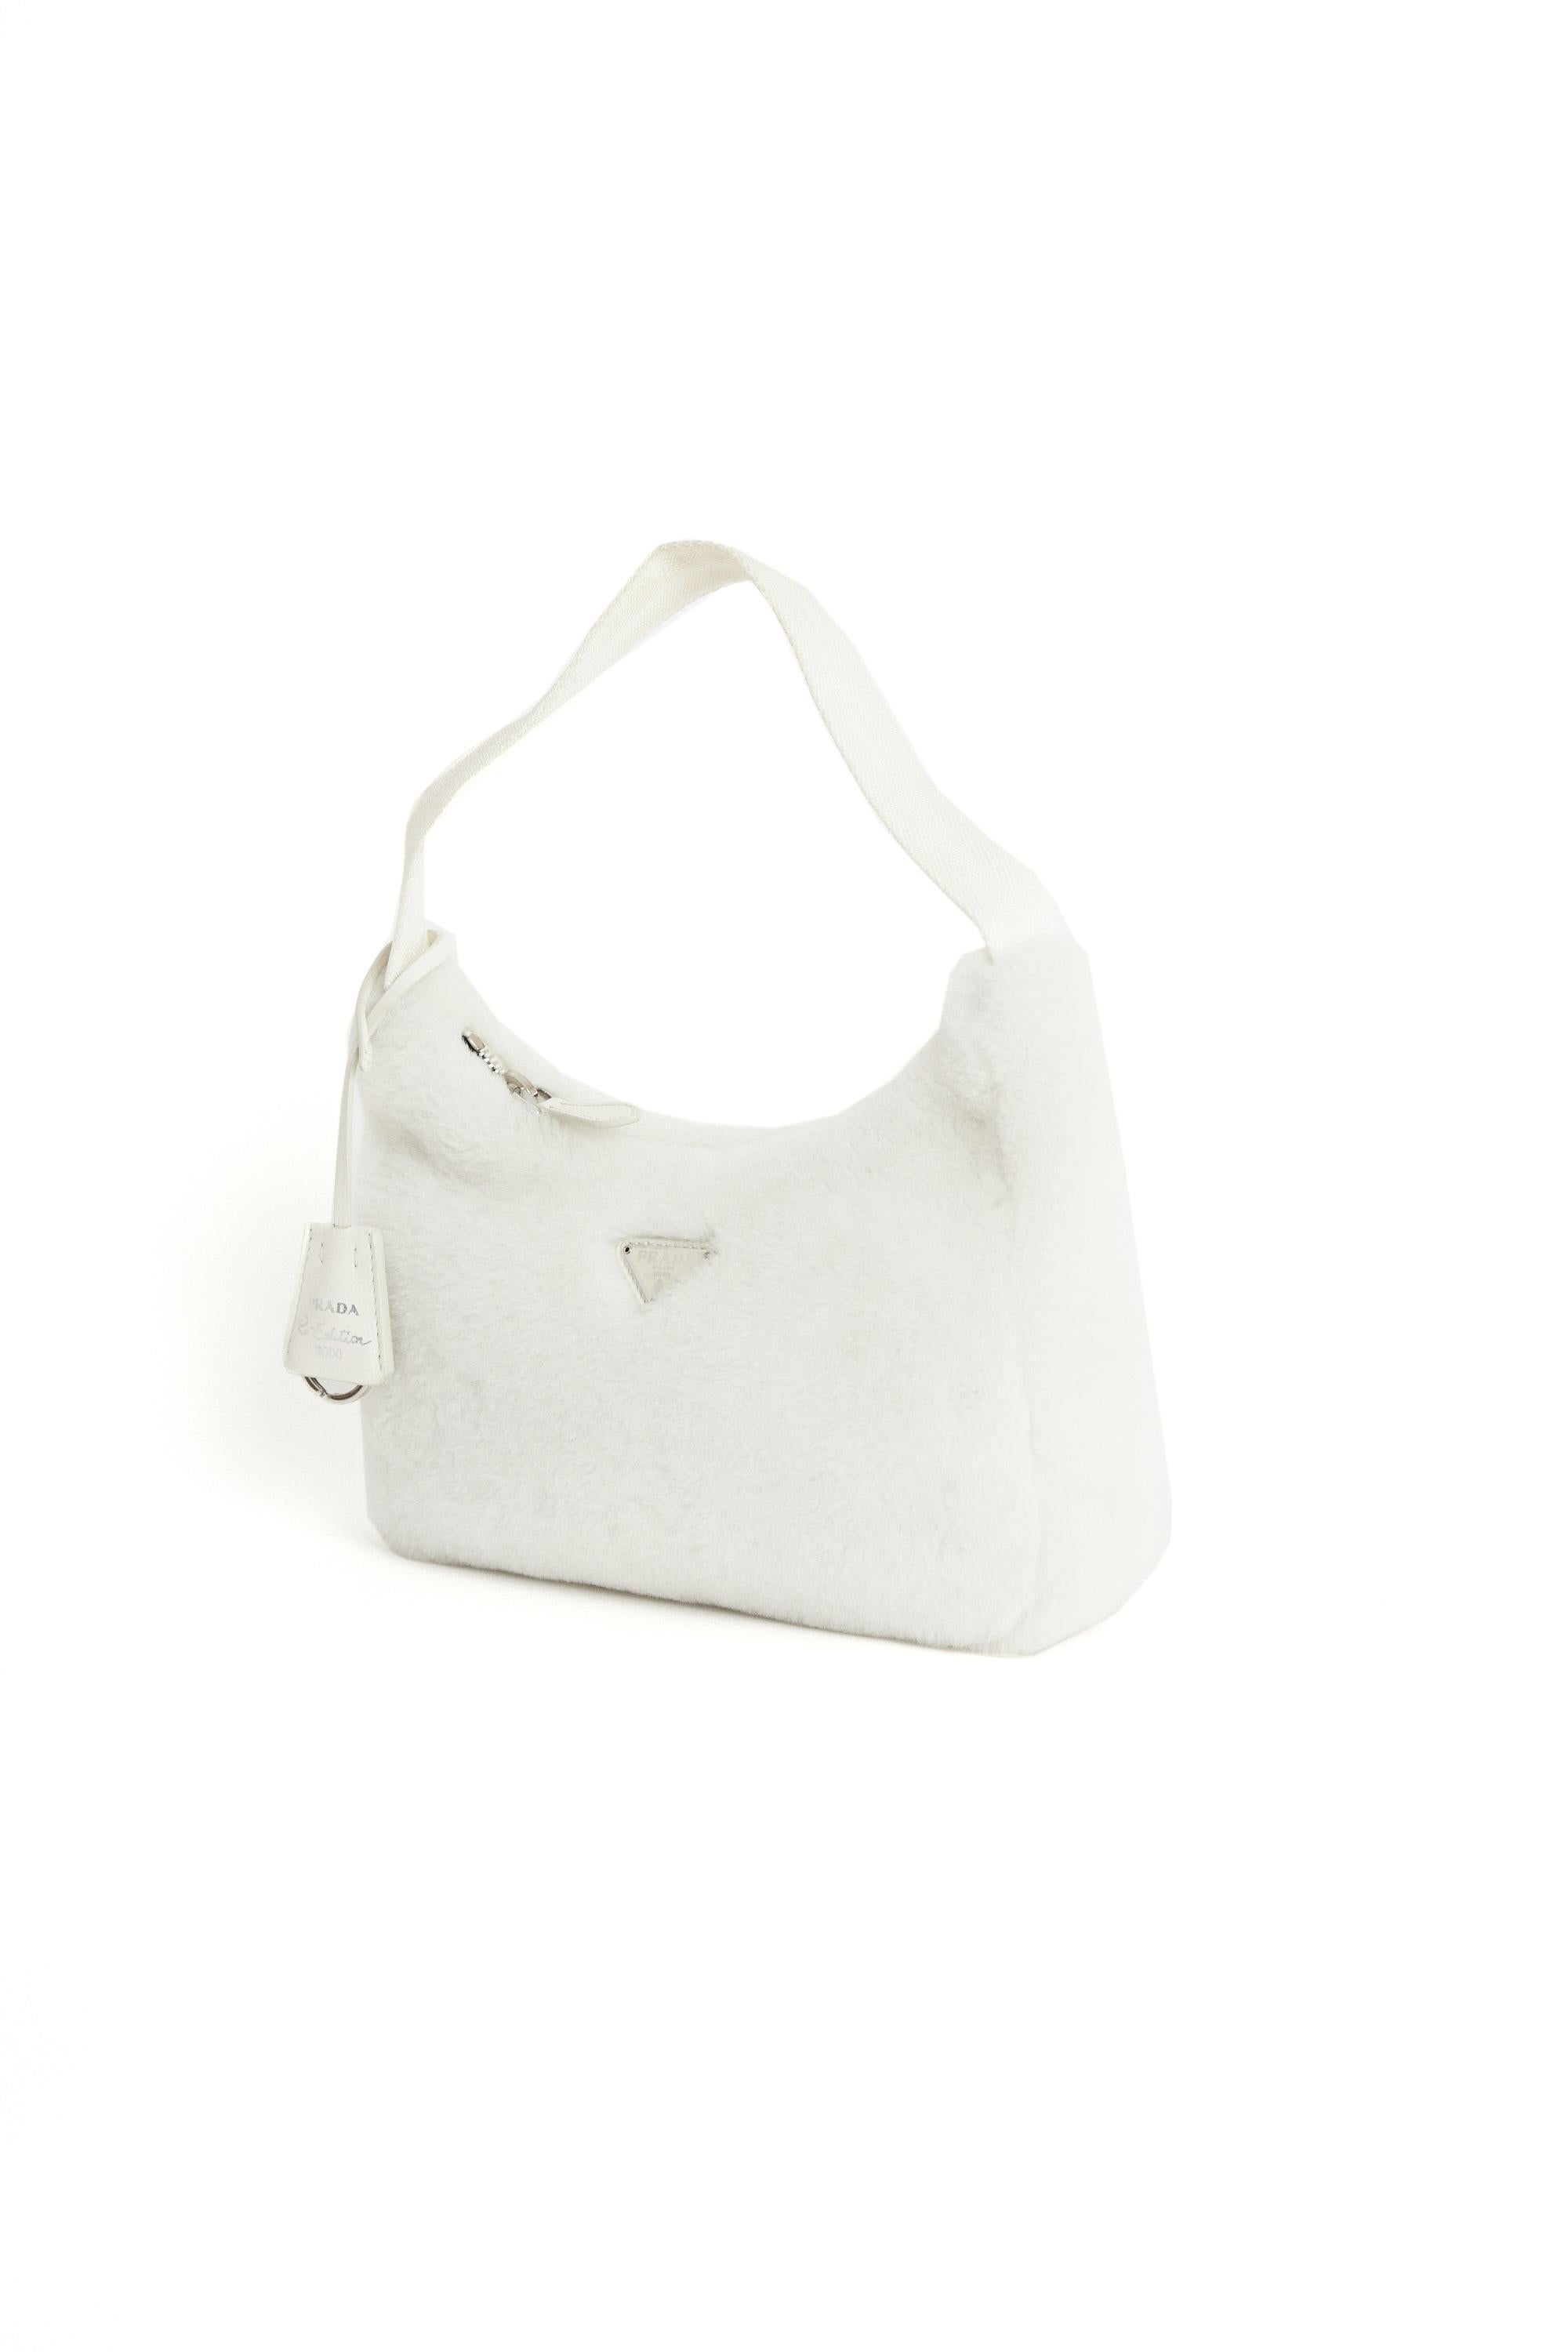 Prada re-edition white shearling hobo bag. Features a keychain and zip closure. Pre-loved, in excellent vintage condition.

Brand:Prada
Color: White
Hobo bag
Fabric: Shearling, Leather
Dustbag: Yes
Authentication card: No
Serial number: